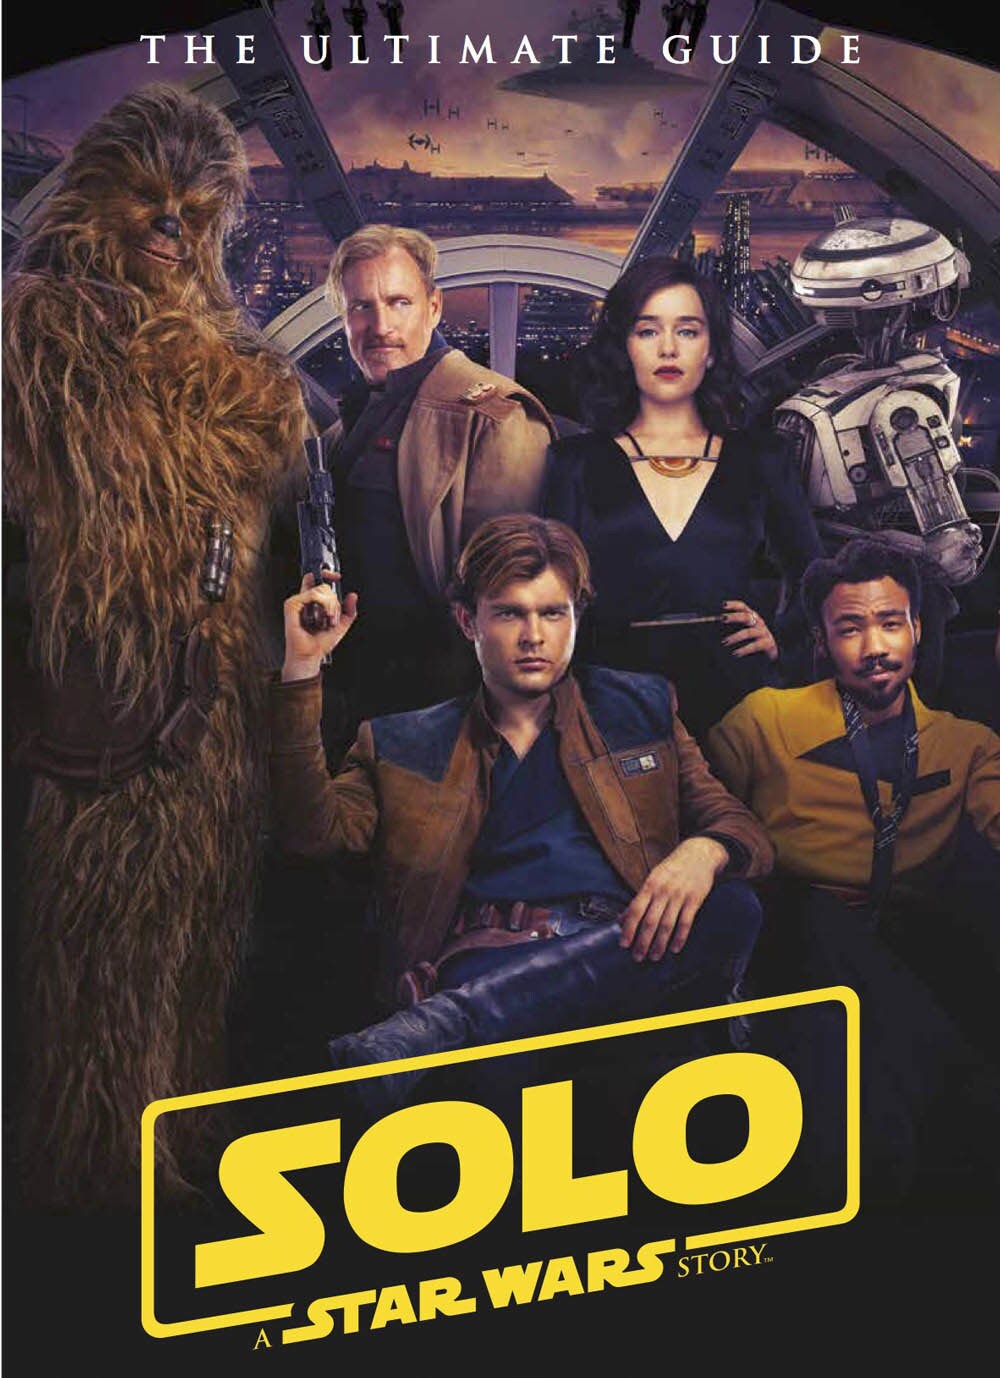 The cover of The Ultimate Guide to Solo: A Star Wars Story.